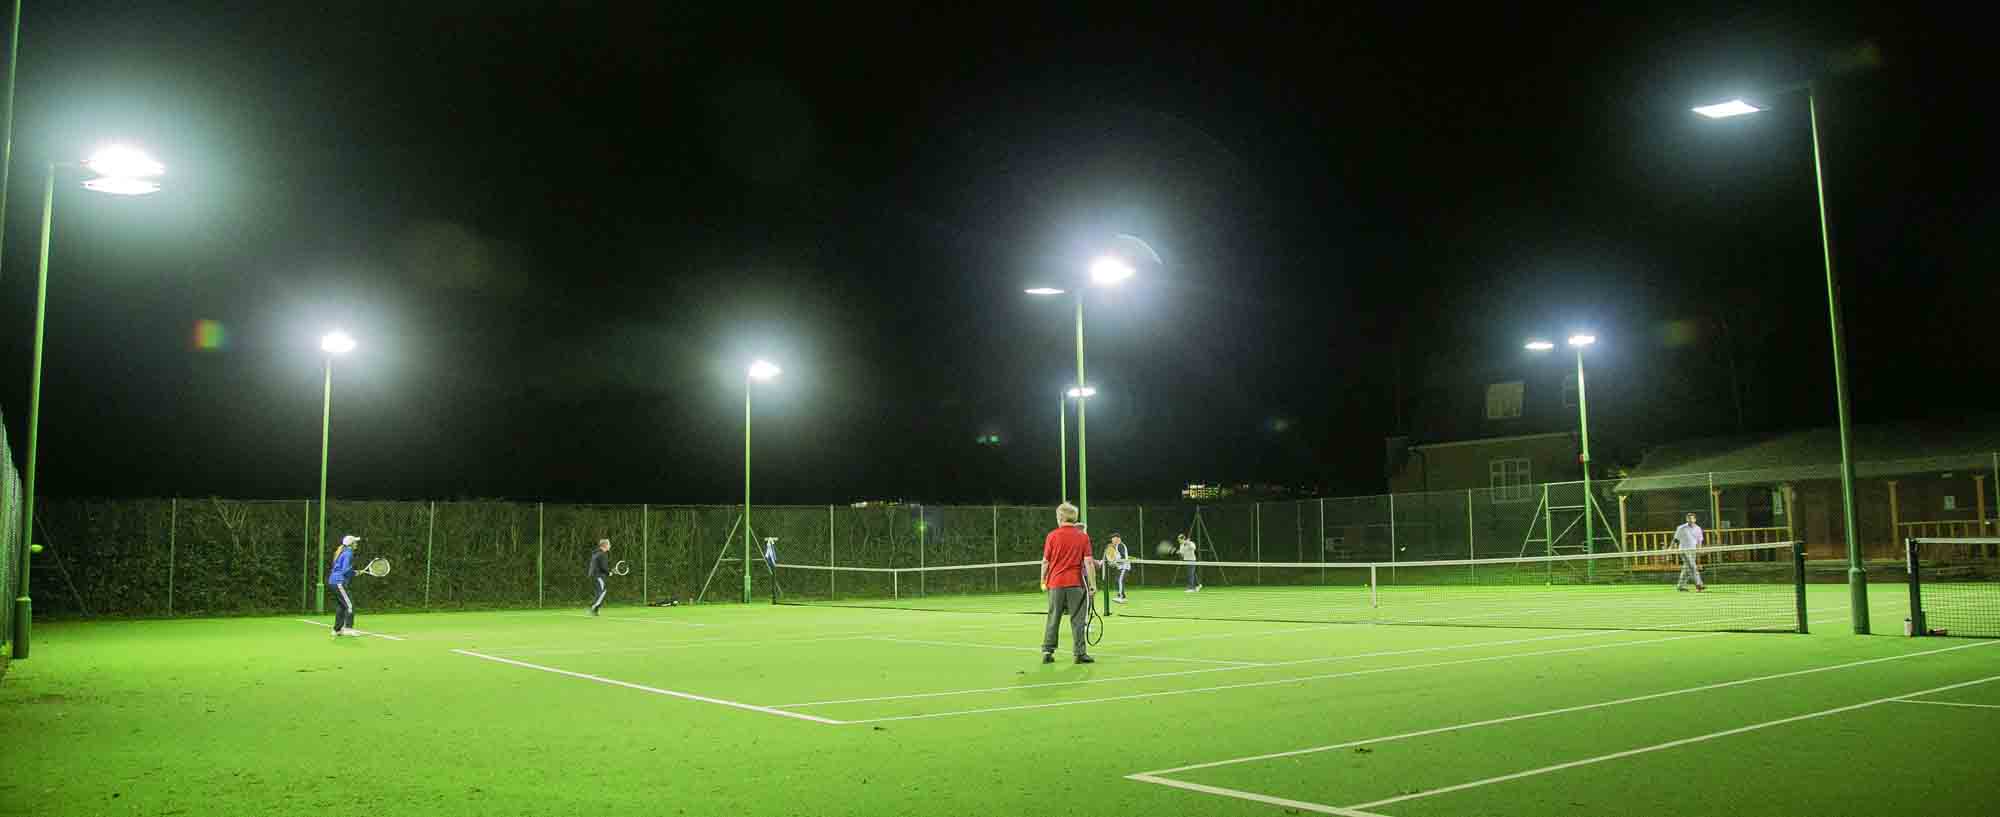 Floodlit tennis courts on a Thursday evening in Stoke Poges